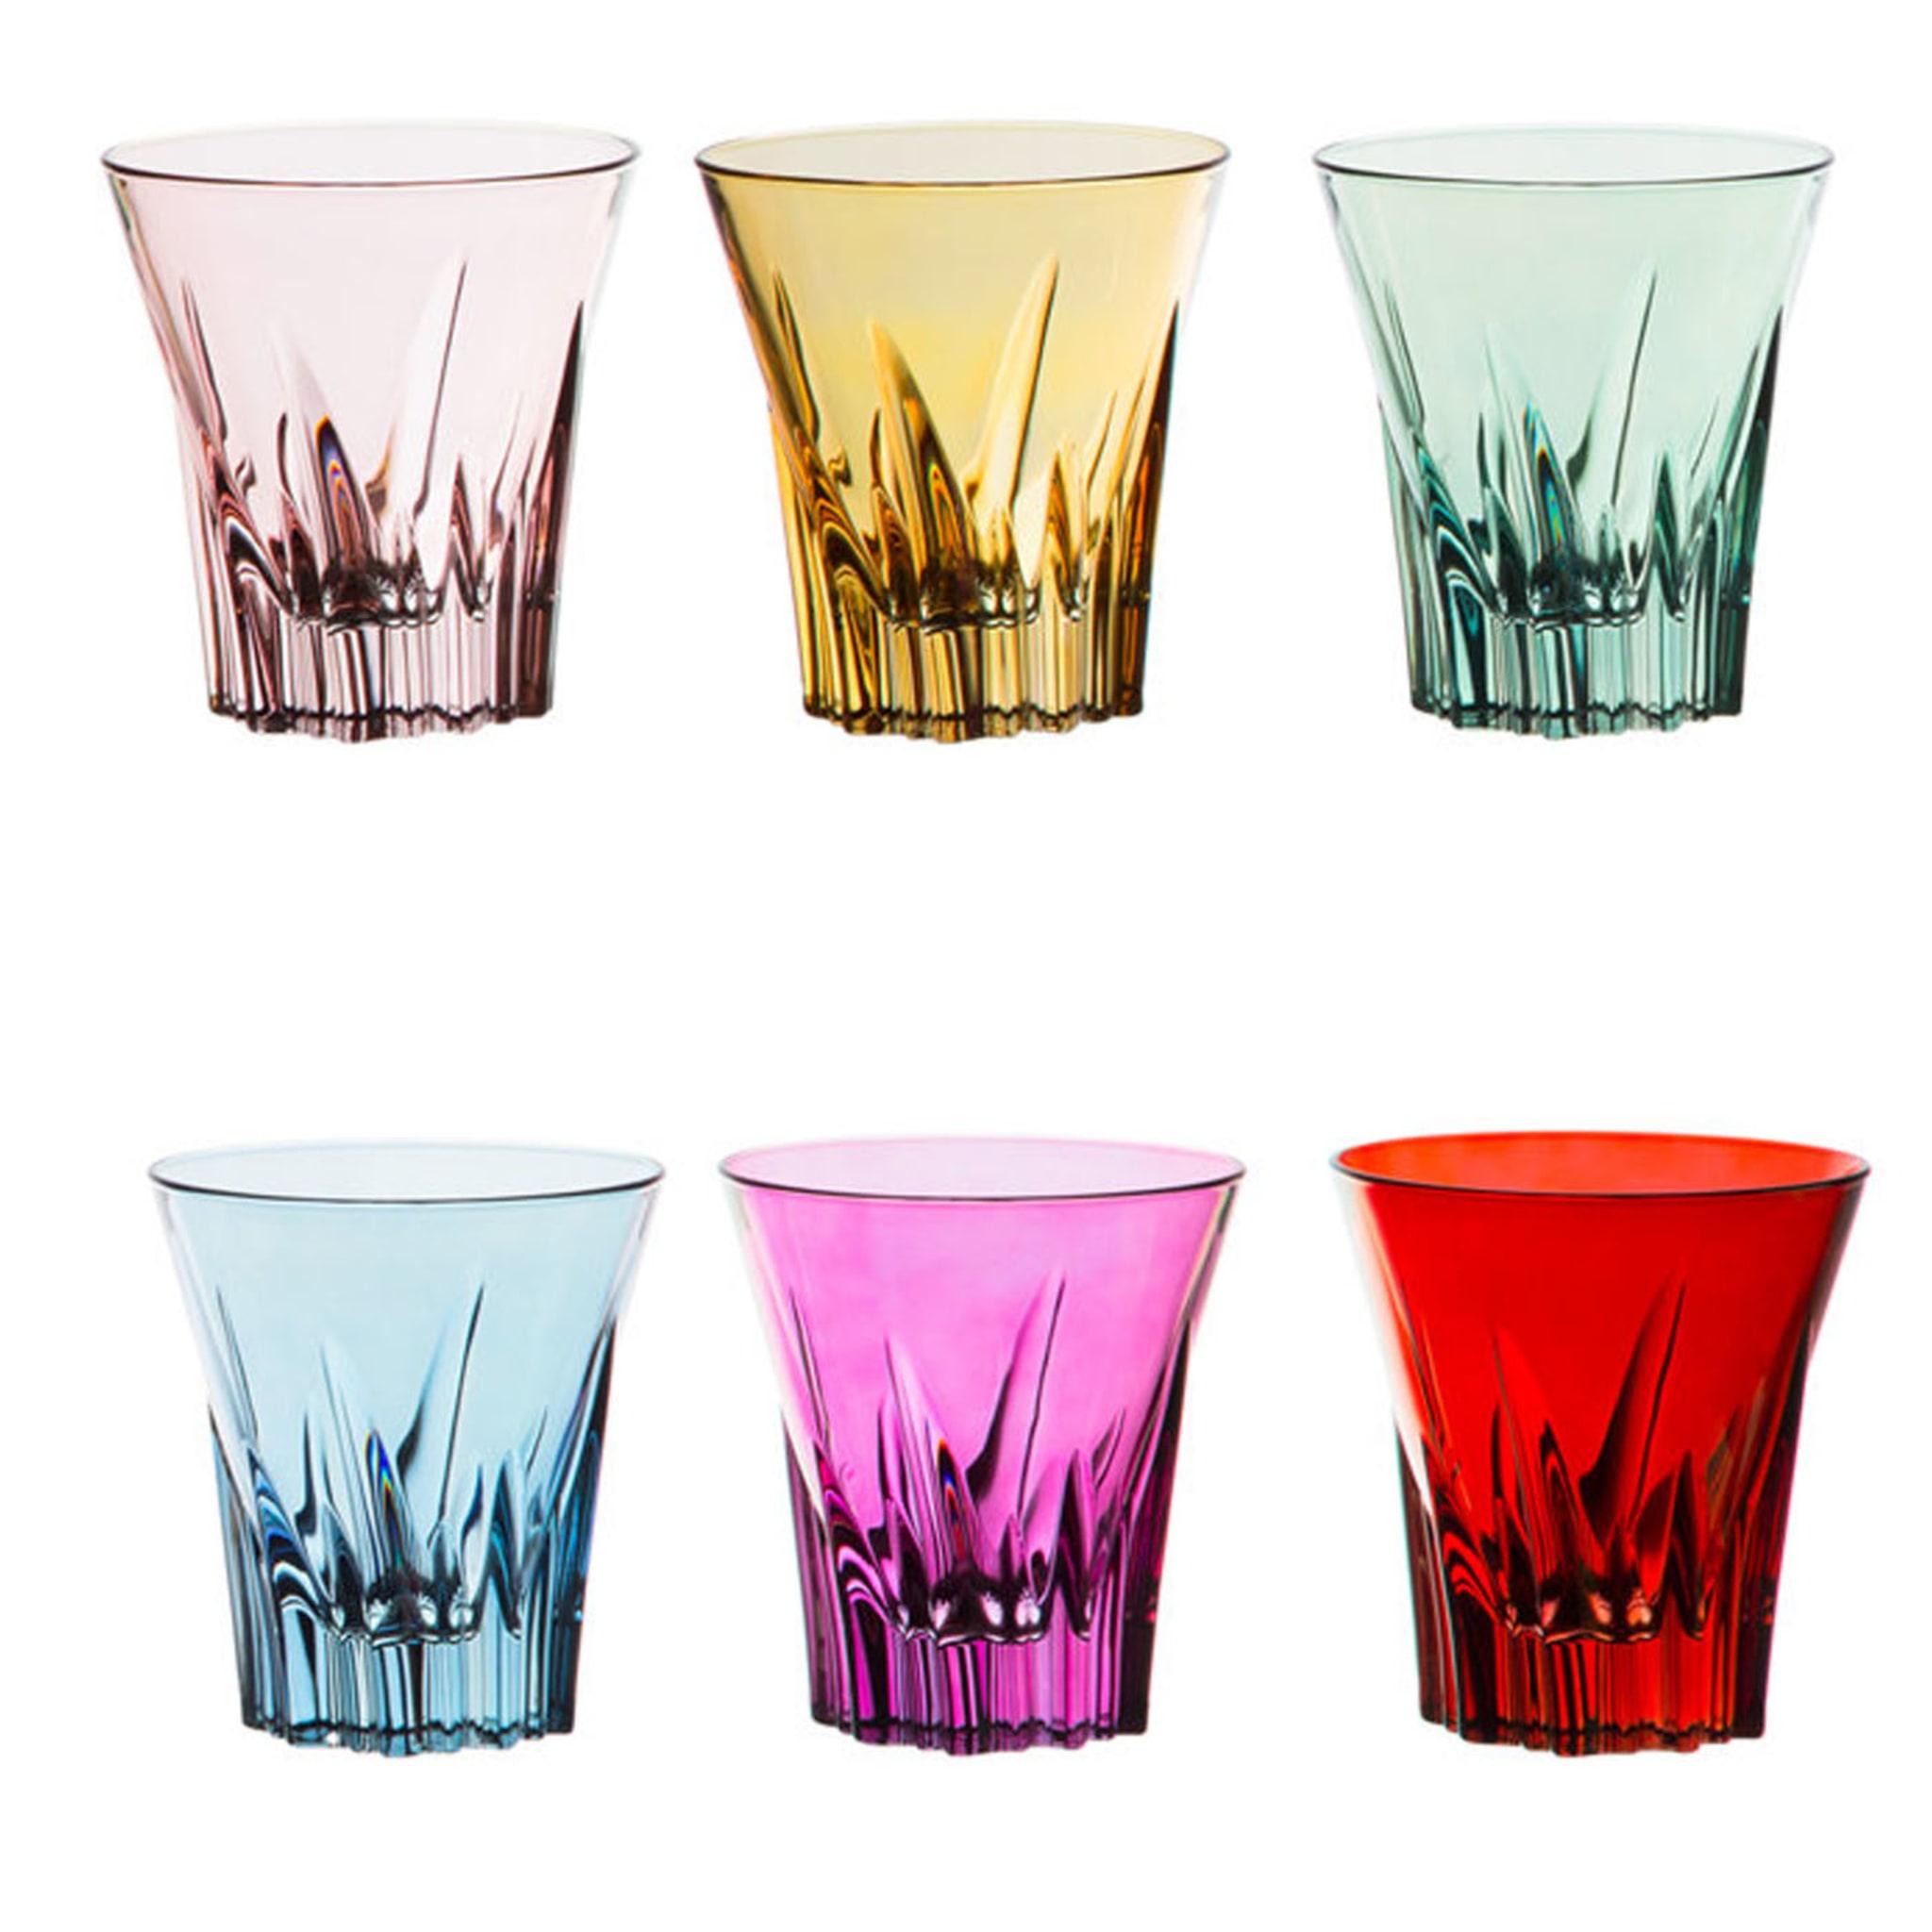 This elegant set is part of the Club Collection, distinctive for their vibrant colors and striking diagonal creases on the glass surface of its pieces, all hand-decorated. Each glass features an elegant texture and flared rim and a bold character